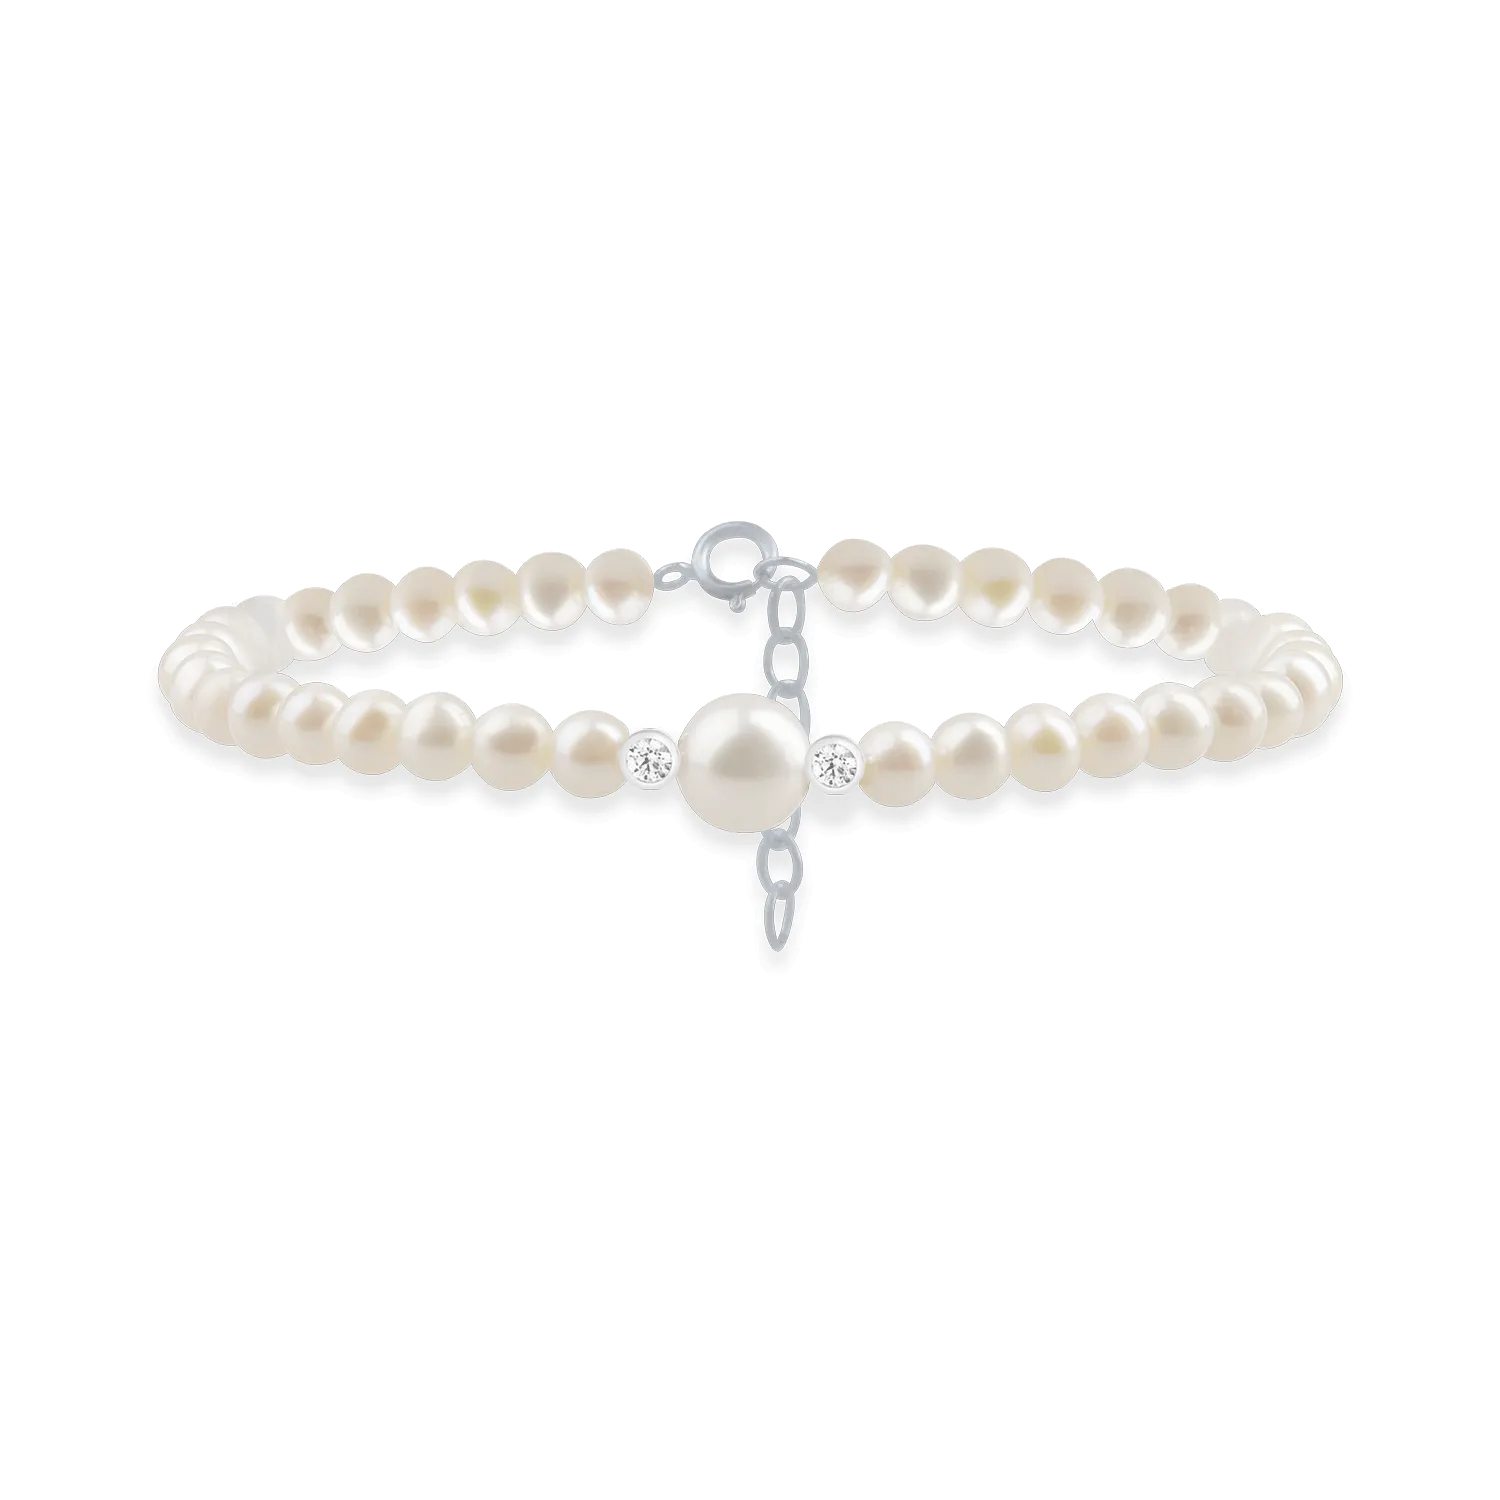 White gold bracelet with 20.89ct fresh water pearls